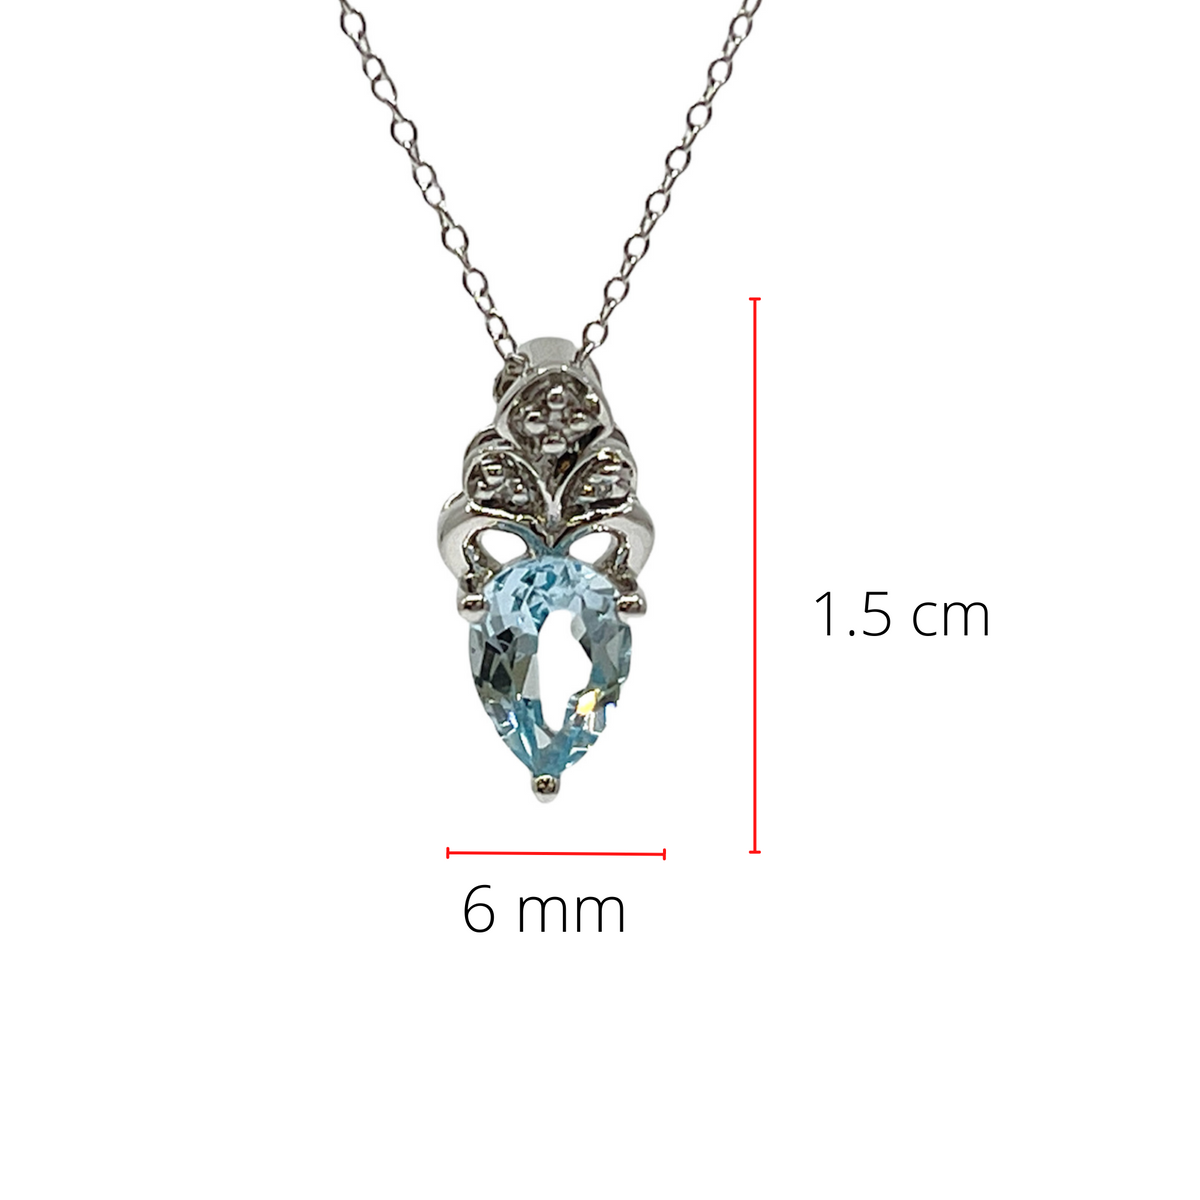 10K White Gold 7mm x 5mm Swiss Blue Topaz and 0.018cttw Diamond Necklace - 18 Inches